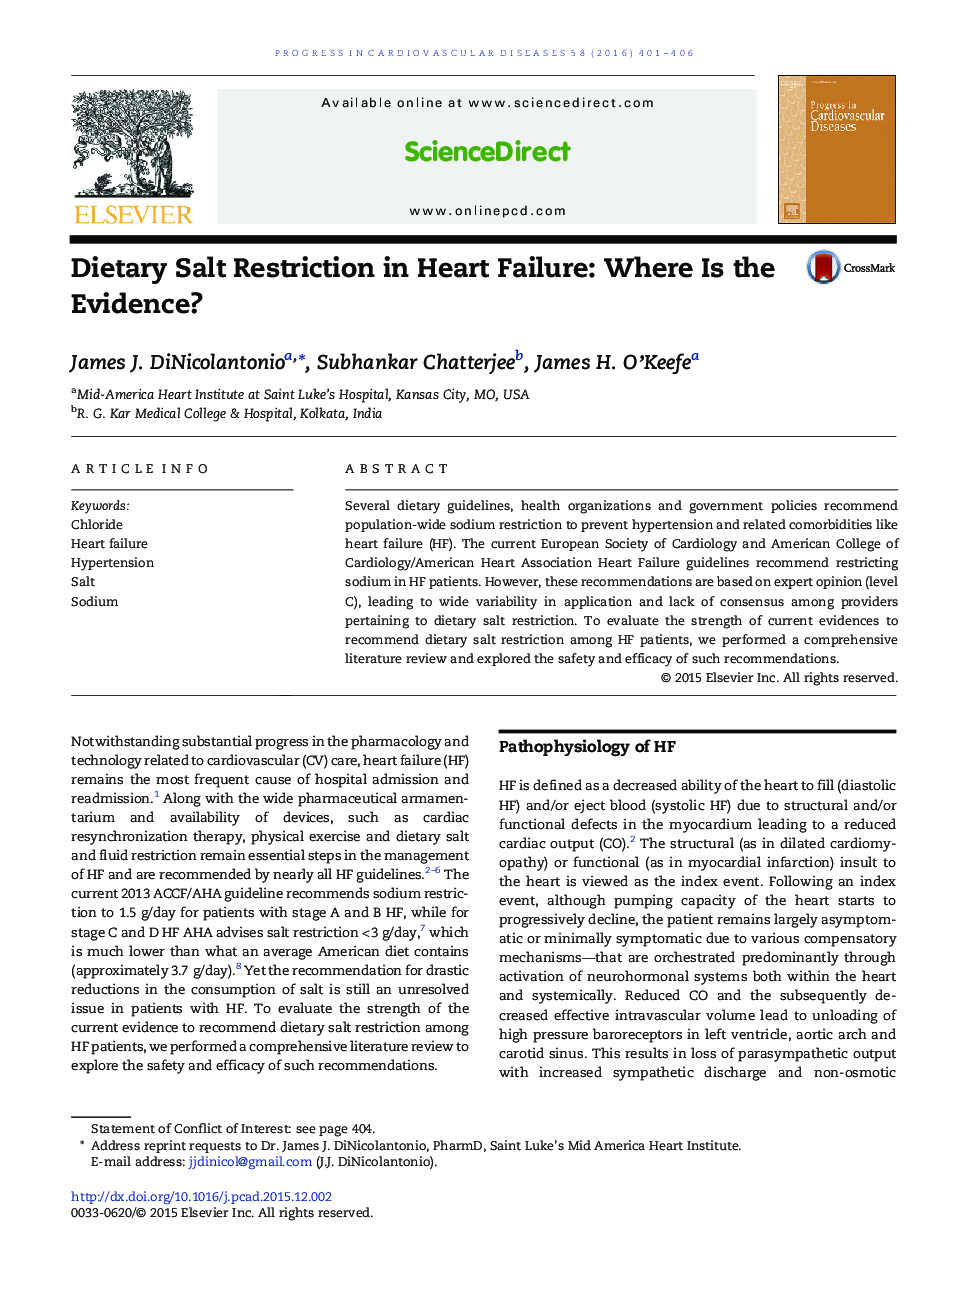 Dietary Salt Restriction in Heart Failure: Where Is the Evidence? 